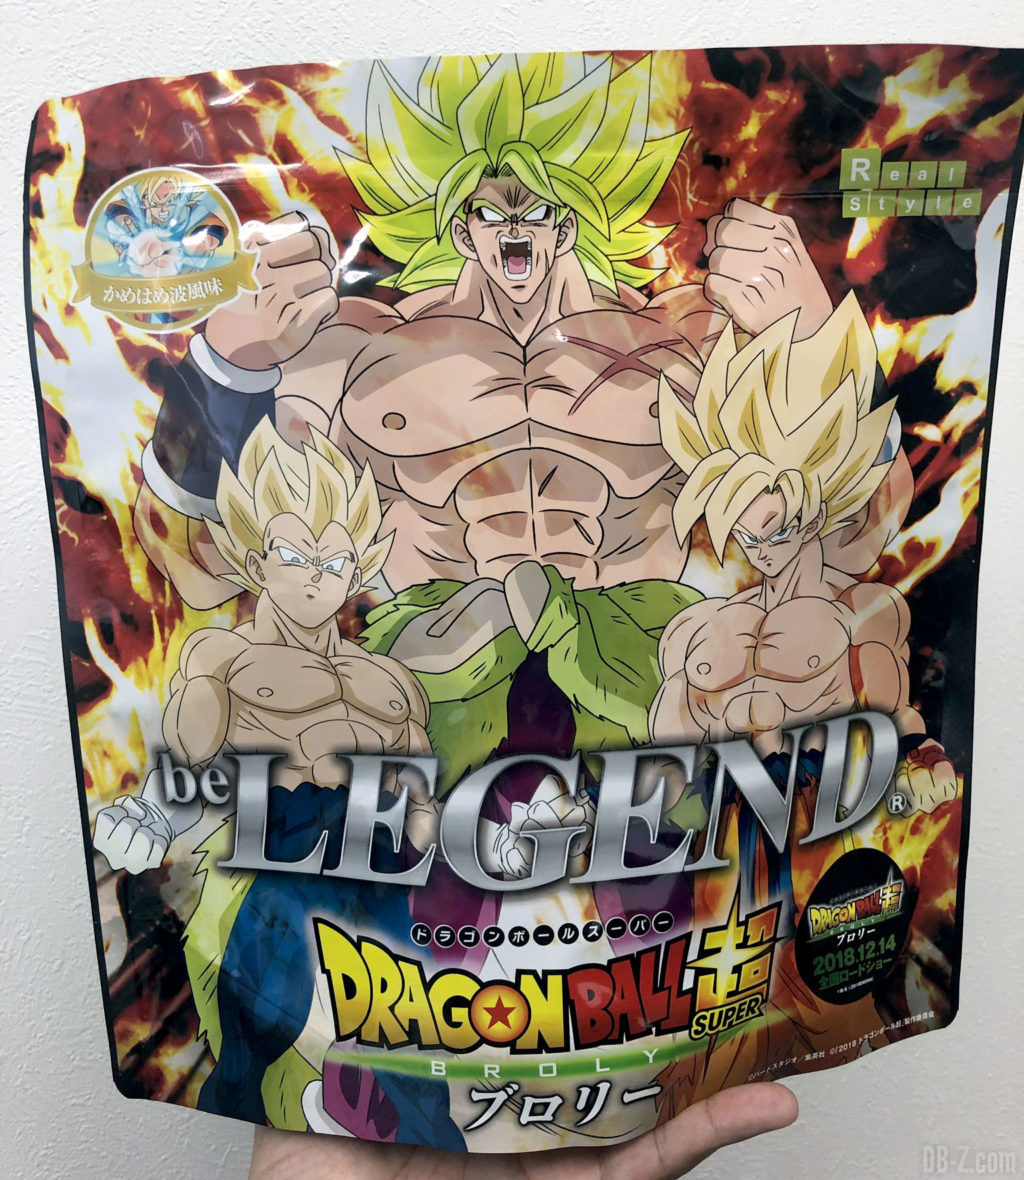 Be Legend & Dragon Ball Super Broly (packaging)